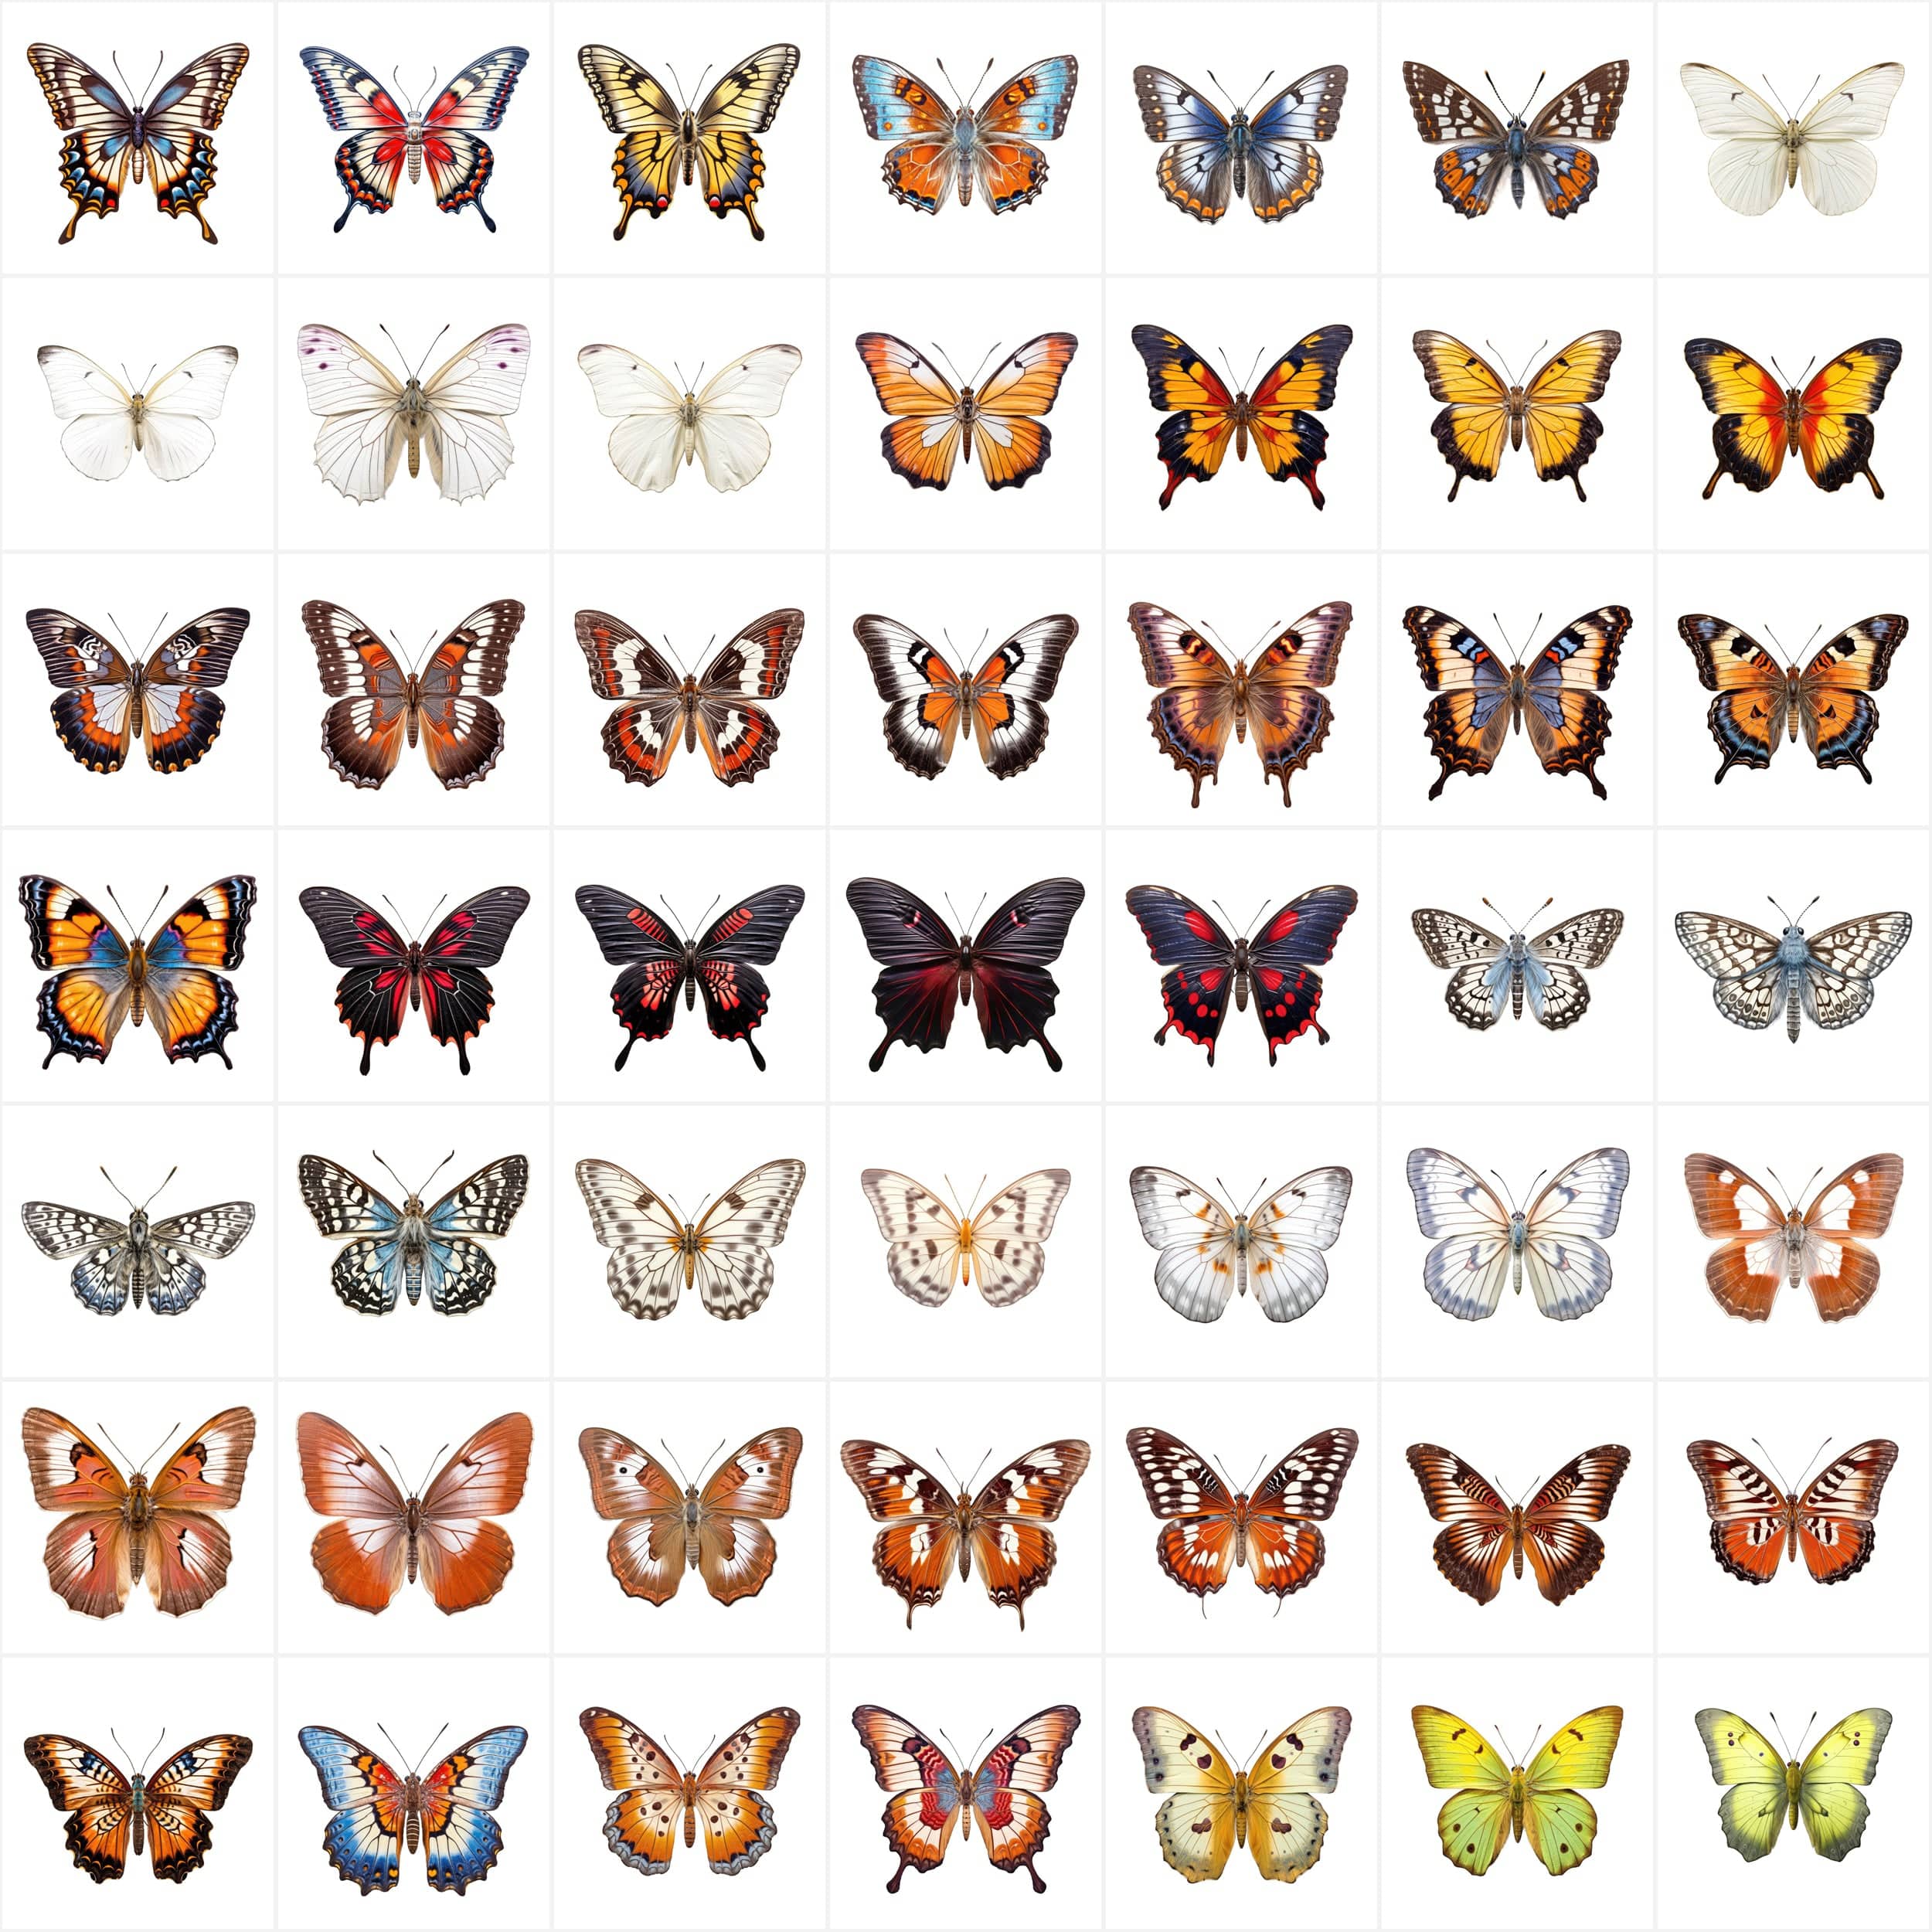 580 High-Resolution Transparent and White-Background Butterfly PNG Images for Commercial Use Digital Download Sumobundle